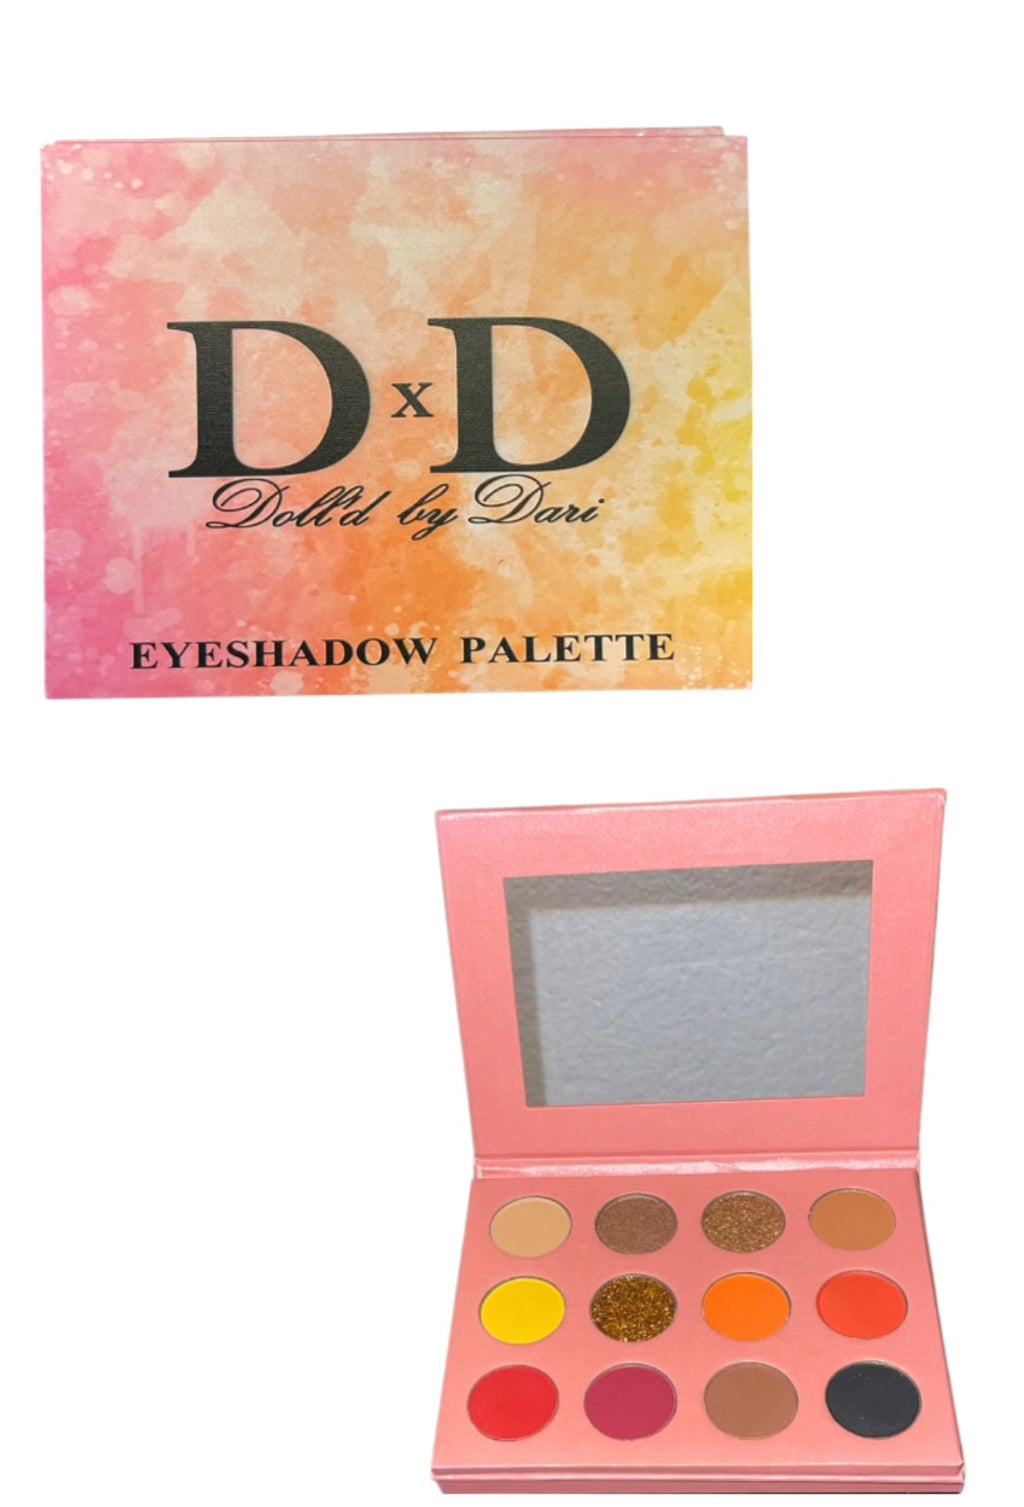 The “Natural Beauty” Eyeshadow Palette